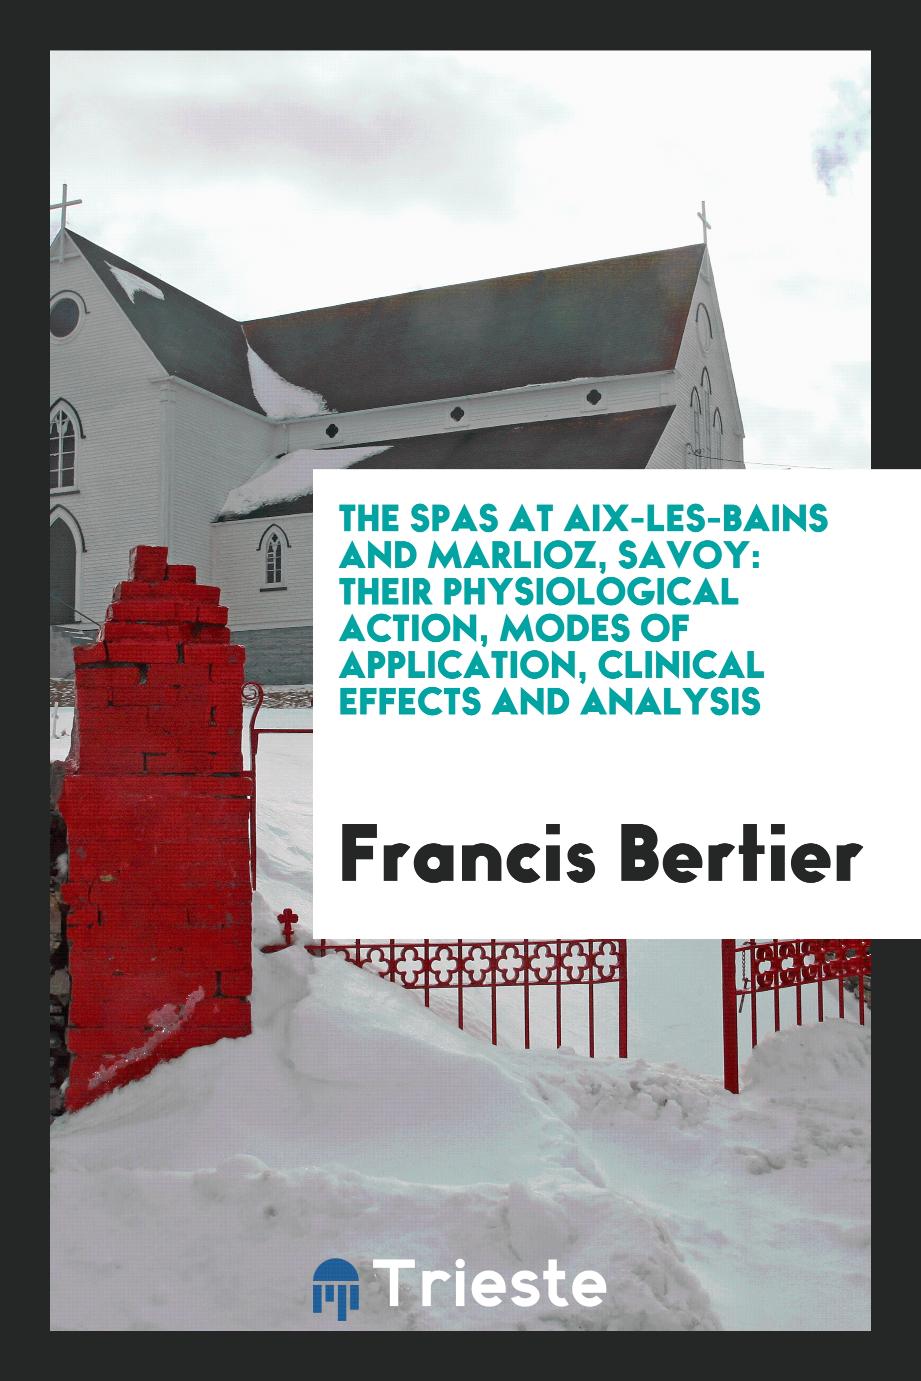 The Spas at Aix-Les-Bains and Marlioz, Savoy: Their Physiological Action, Modes of Application, Clinical Effects and Analysis